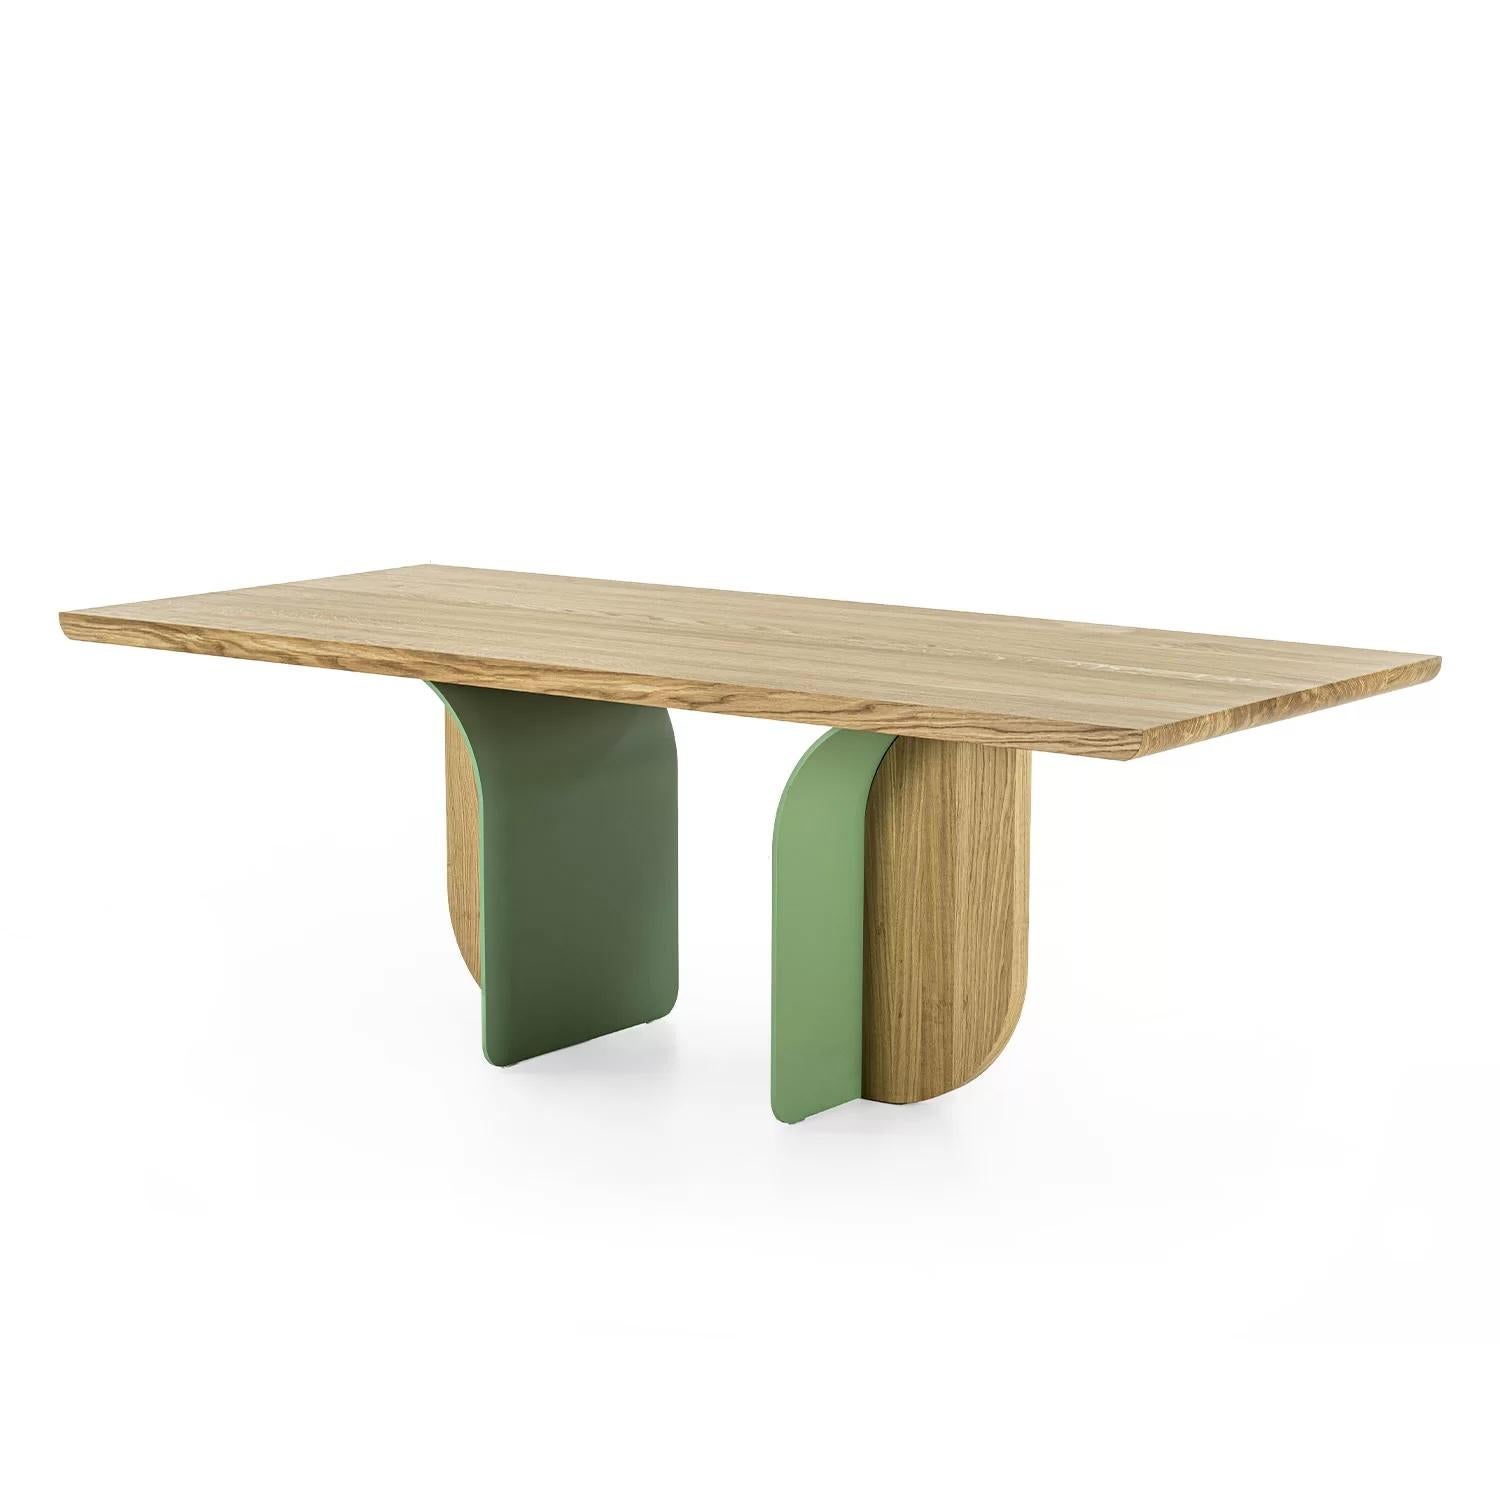 Italian Forma Solid Wood Dining Table, Designed by Carlesi Tonelli, Made in Italy  For Sale